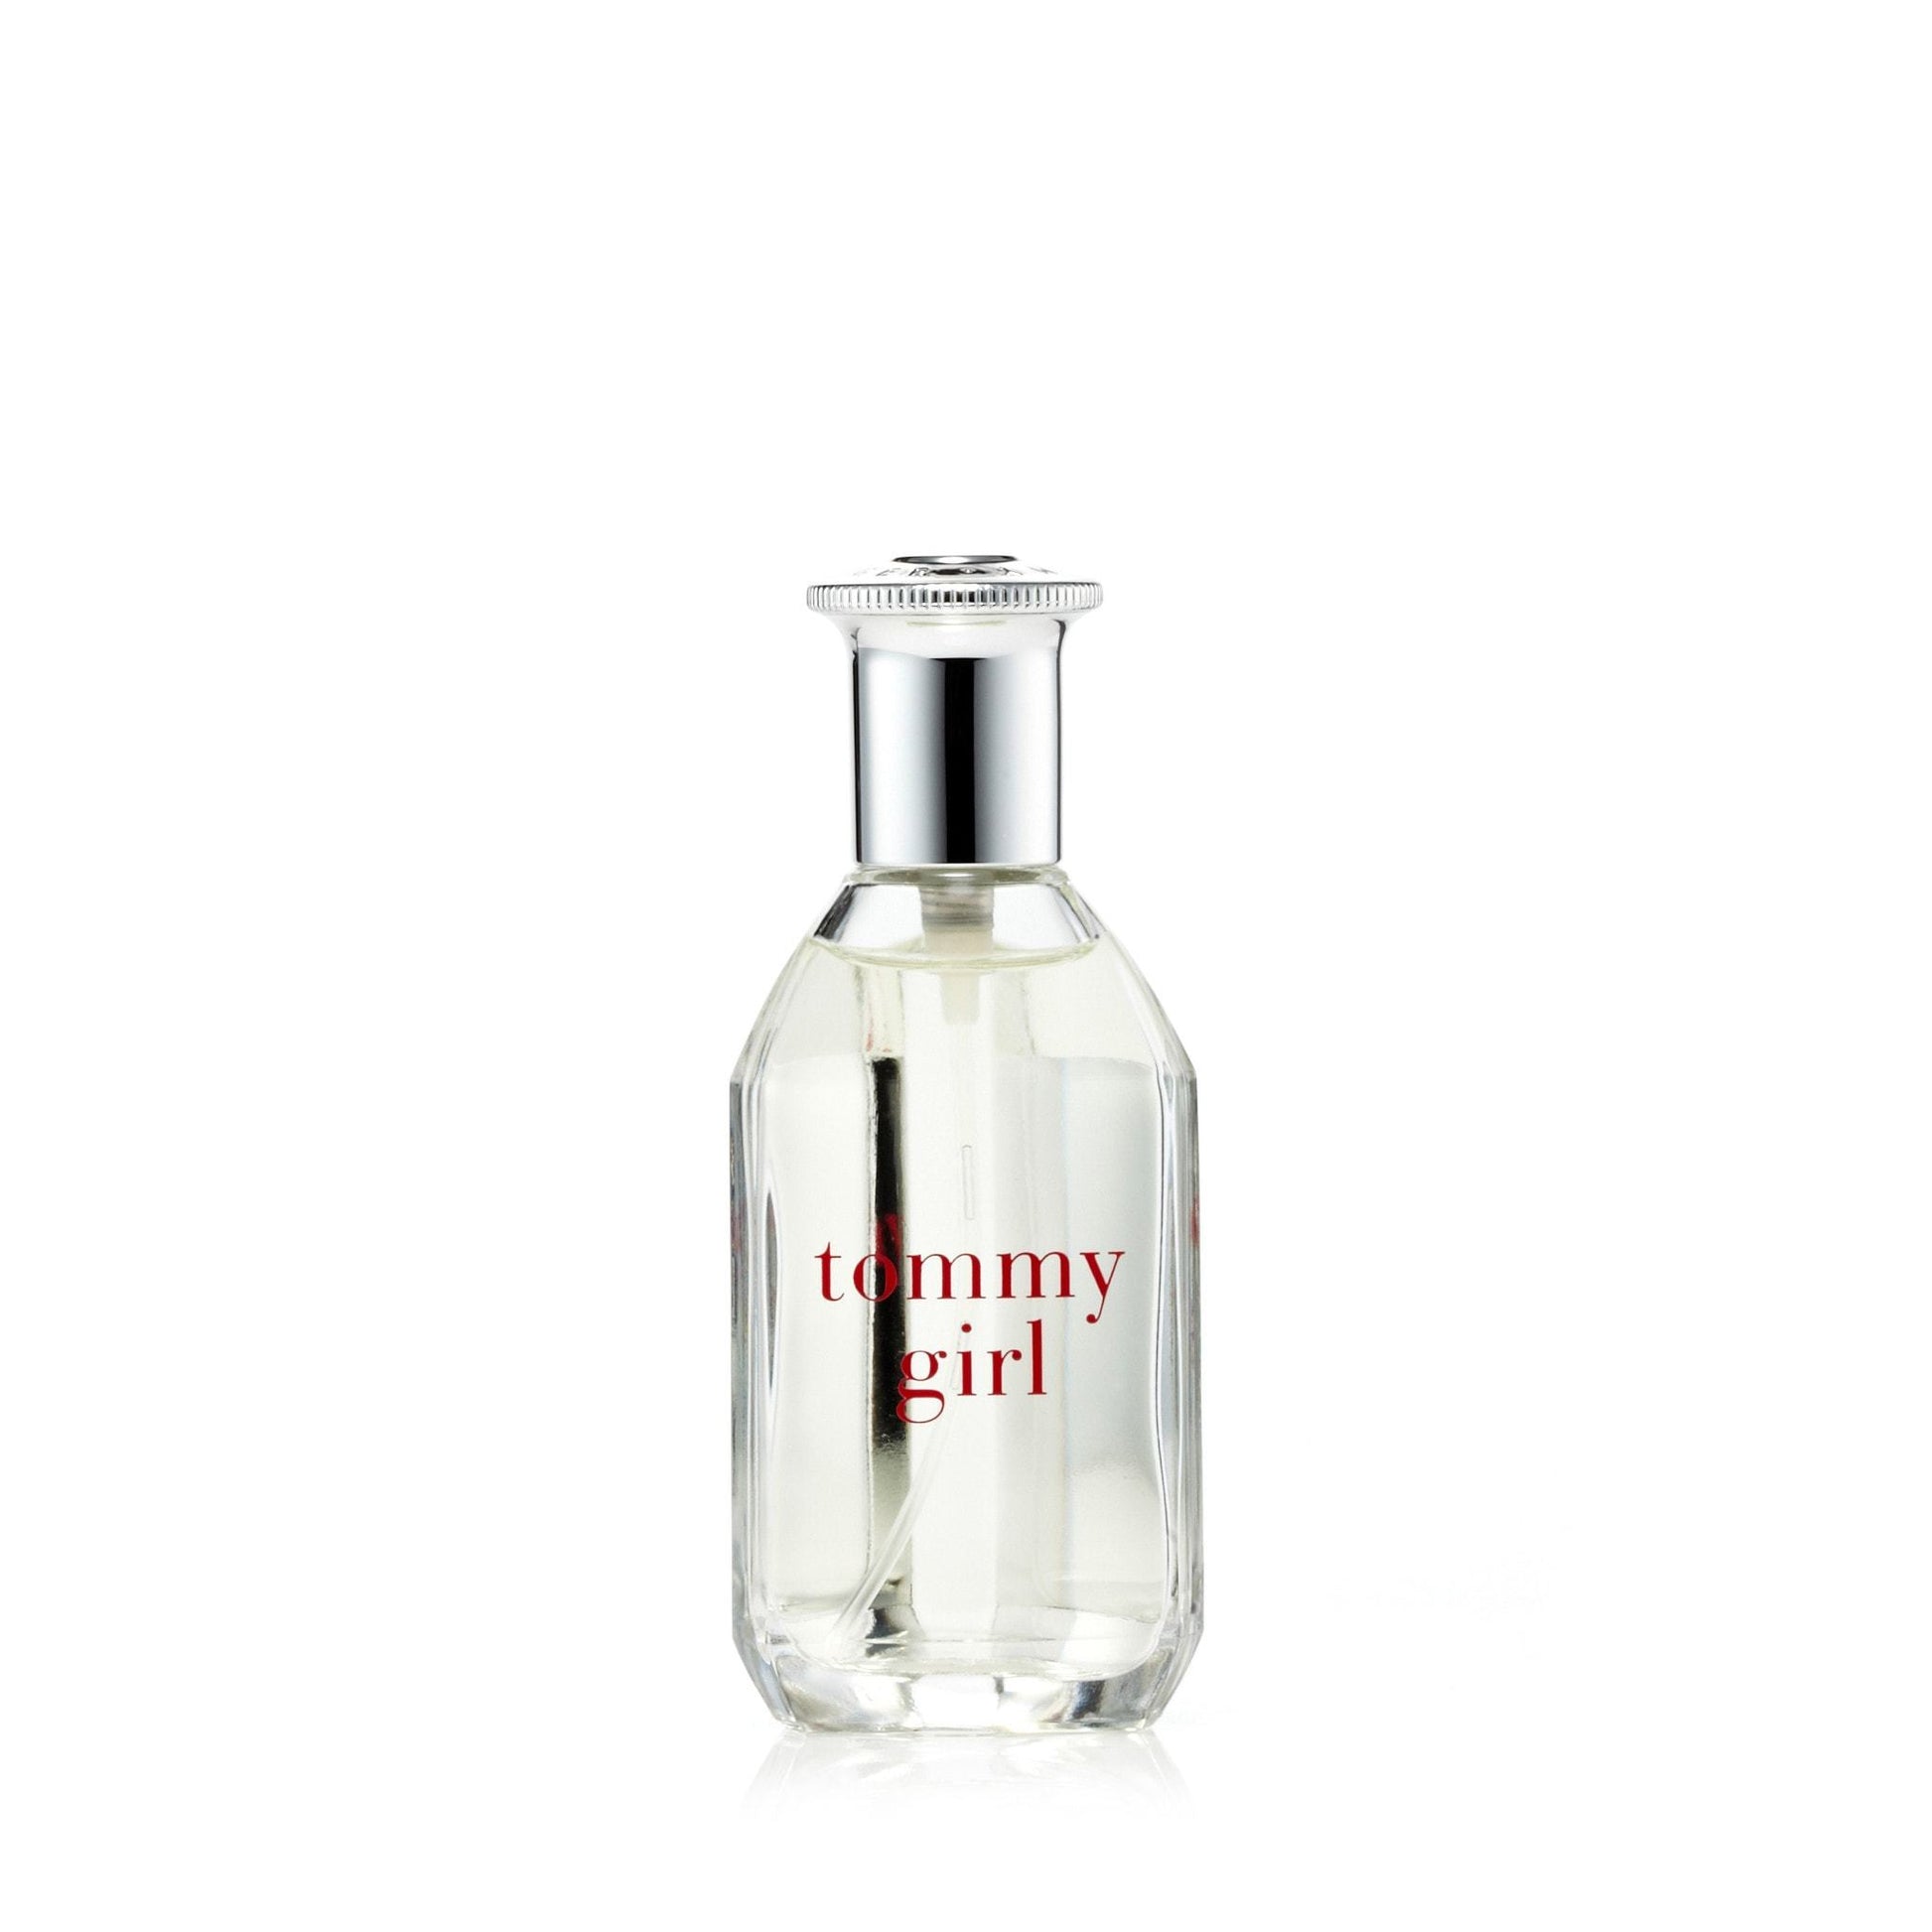 Tommy Girl Eau de Toilette Spray for Women by Tommy Hilfiger, Product image 3